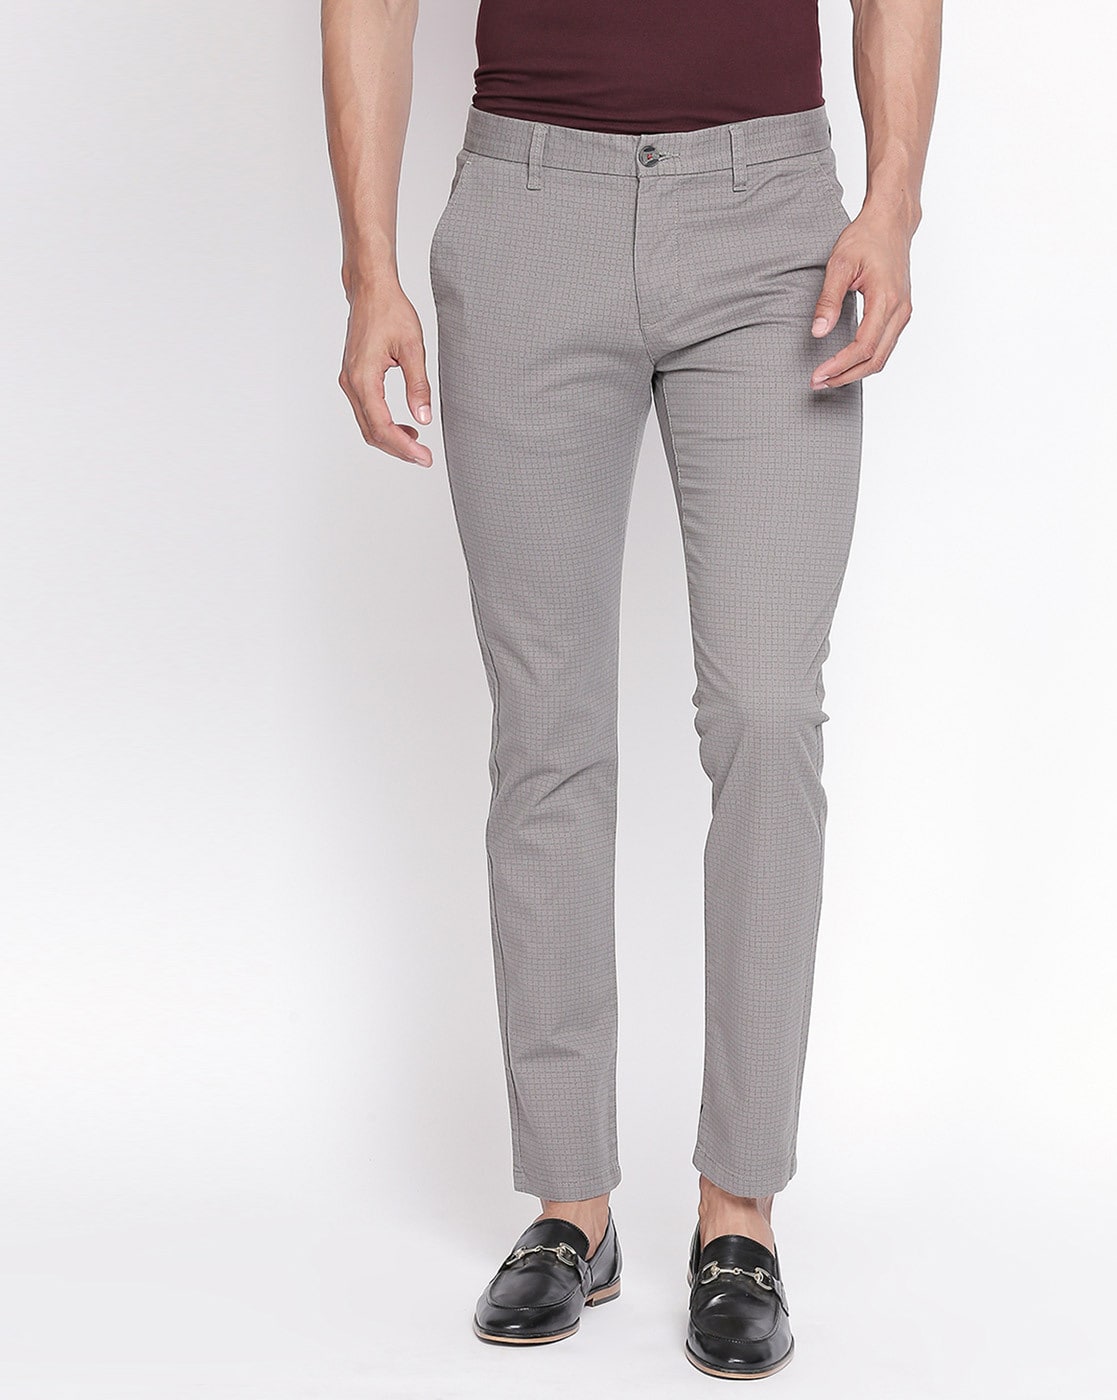 Byford By Pantaloons Slim Fit Trousers  Buy Byford By Pantaloons Slim Fit  Trousers Online In India